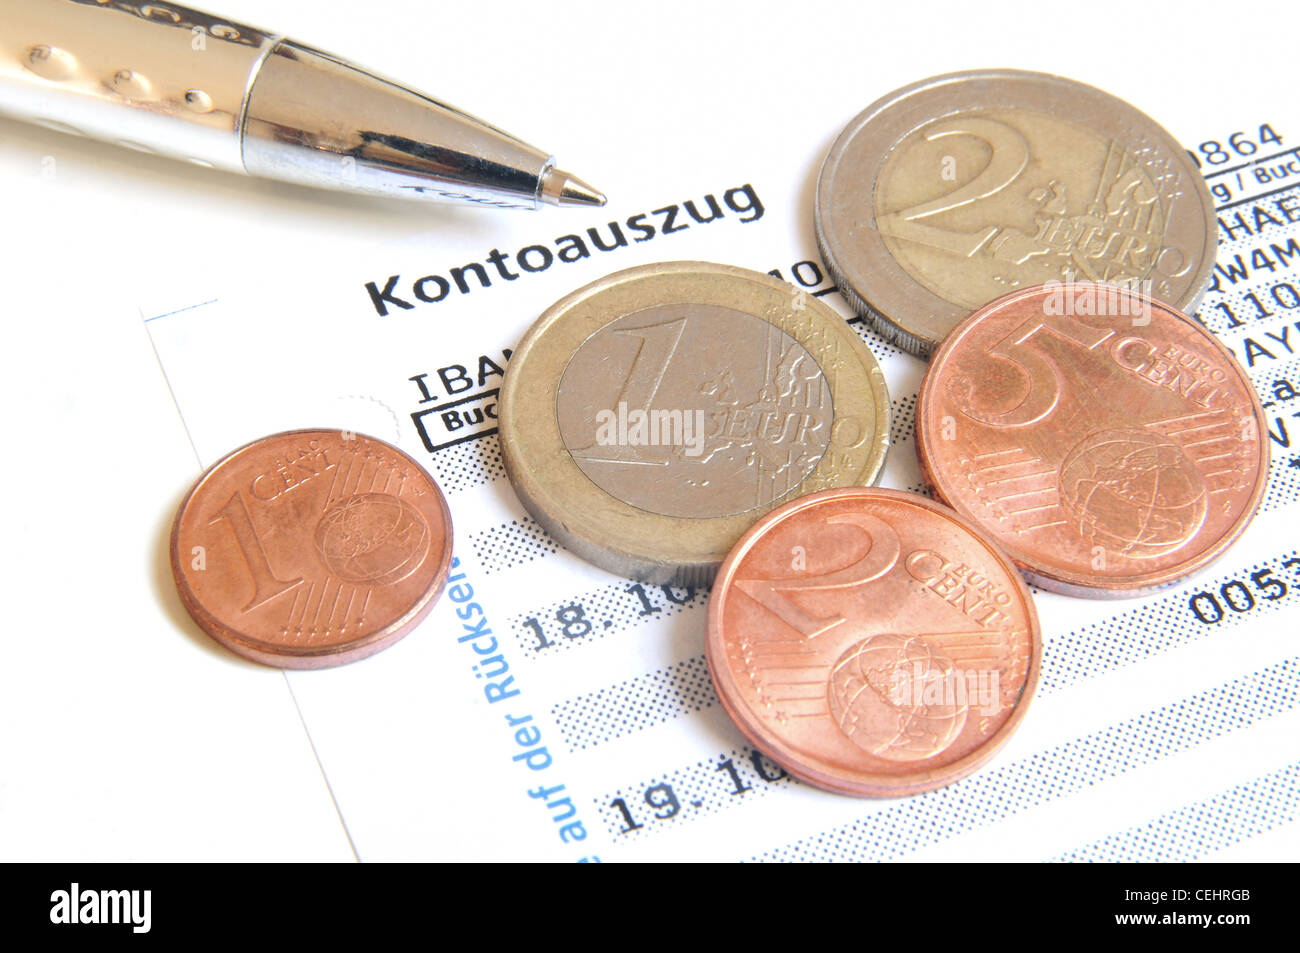 Euro coins and ball pen on top of a bank statement Stock Photo